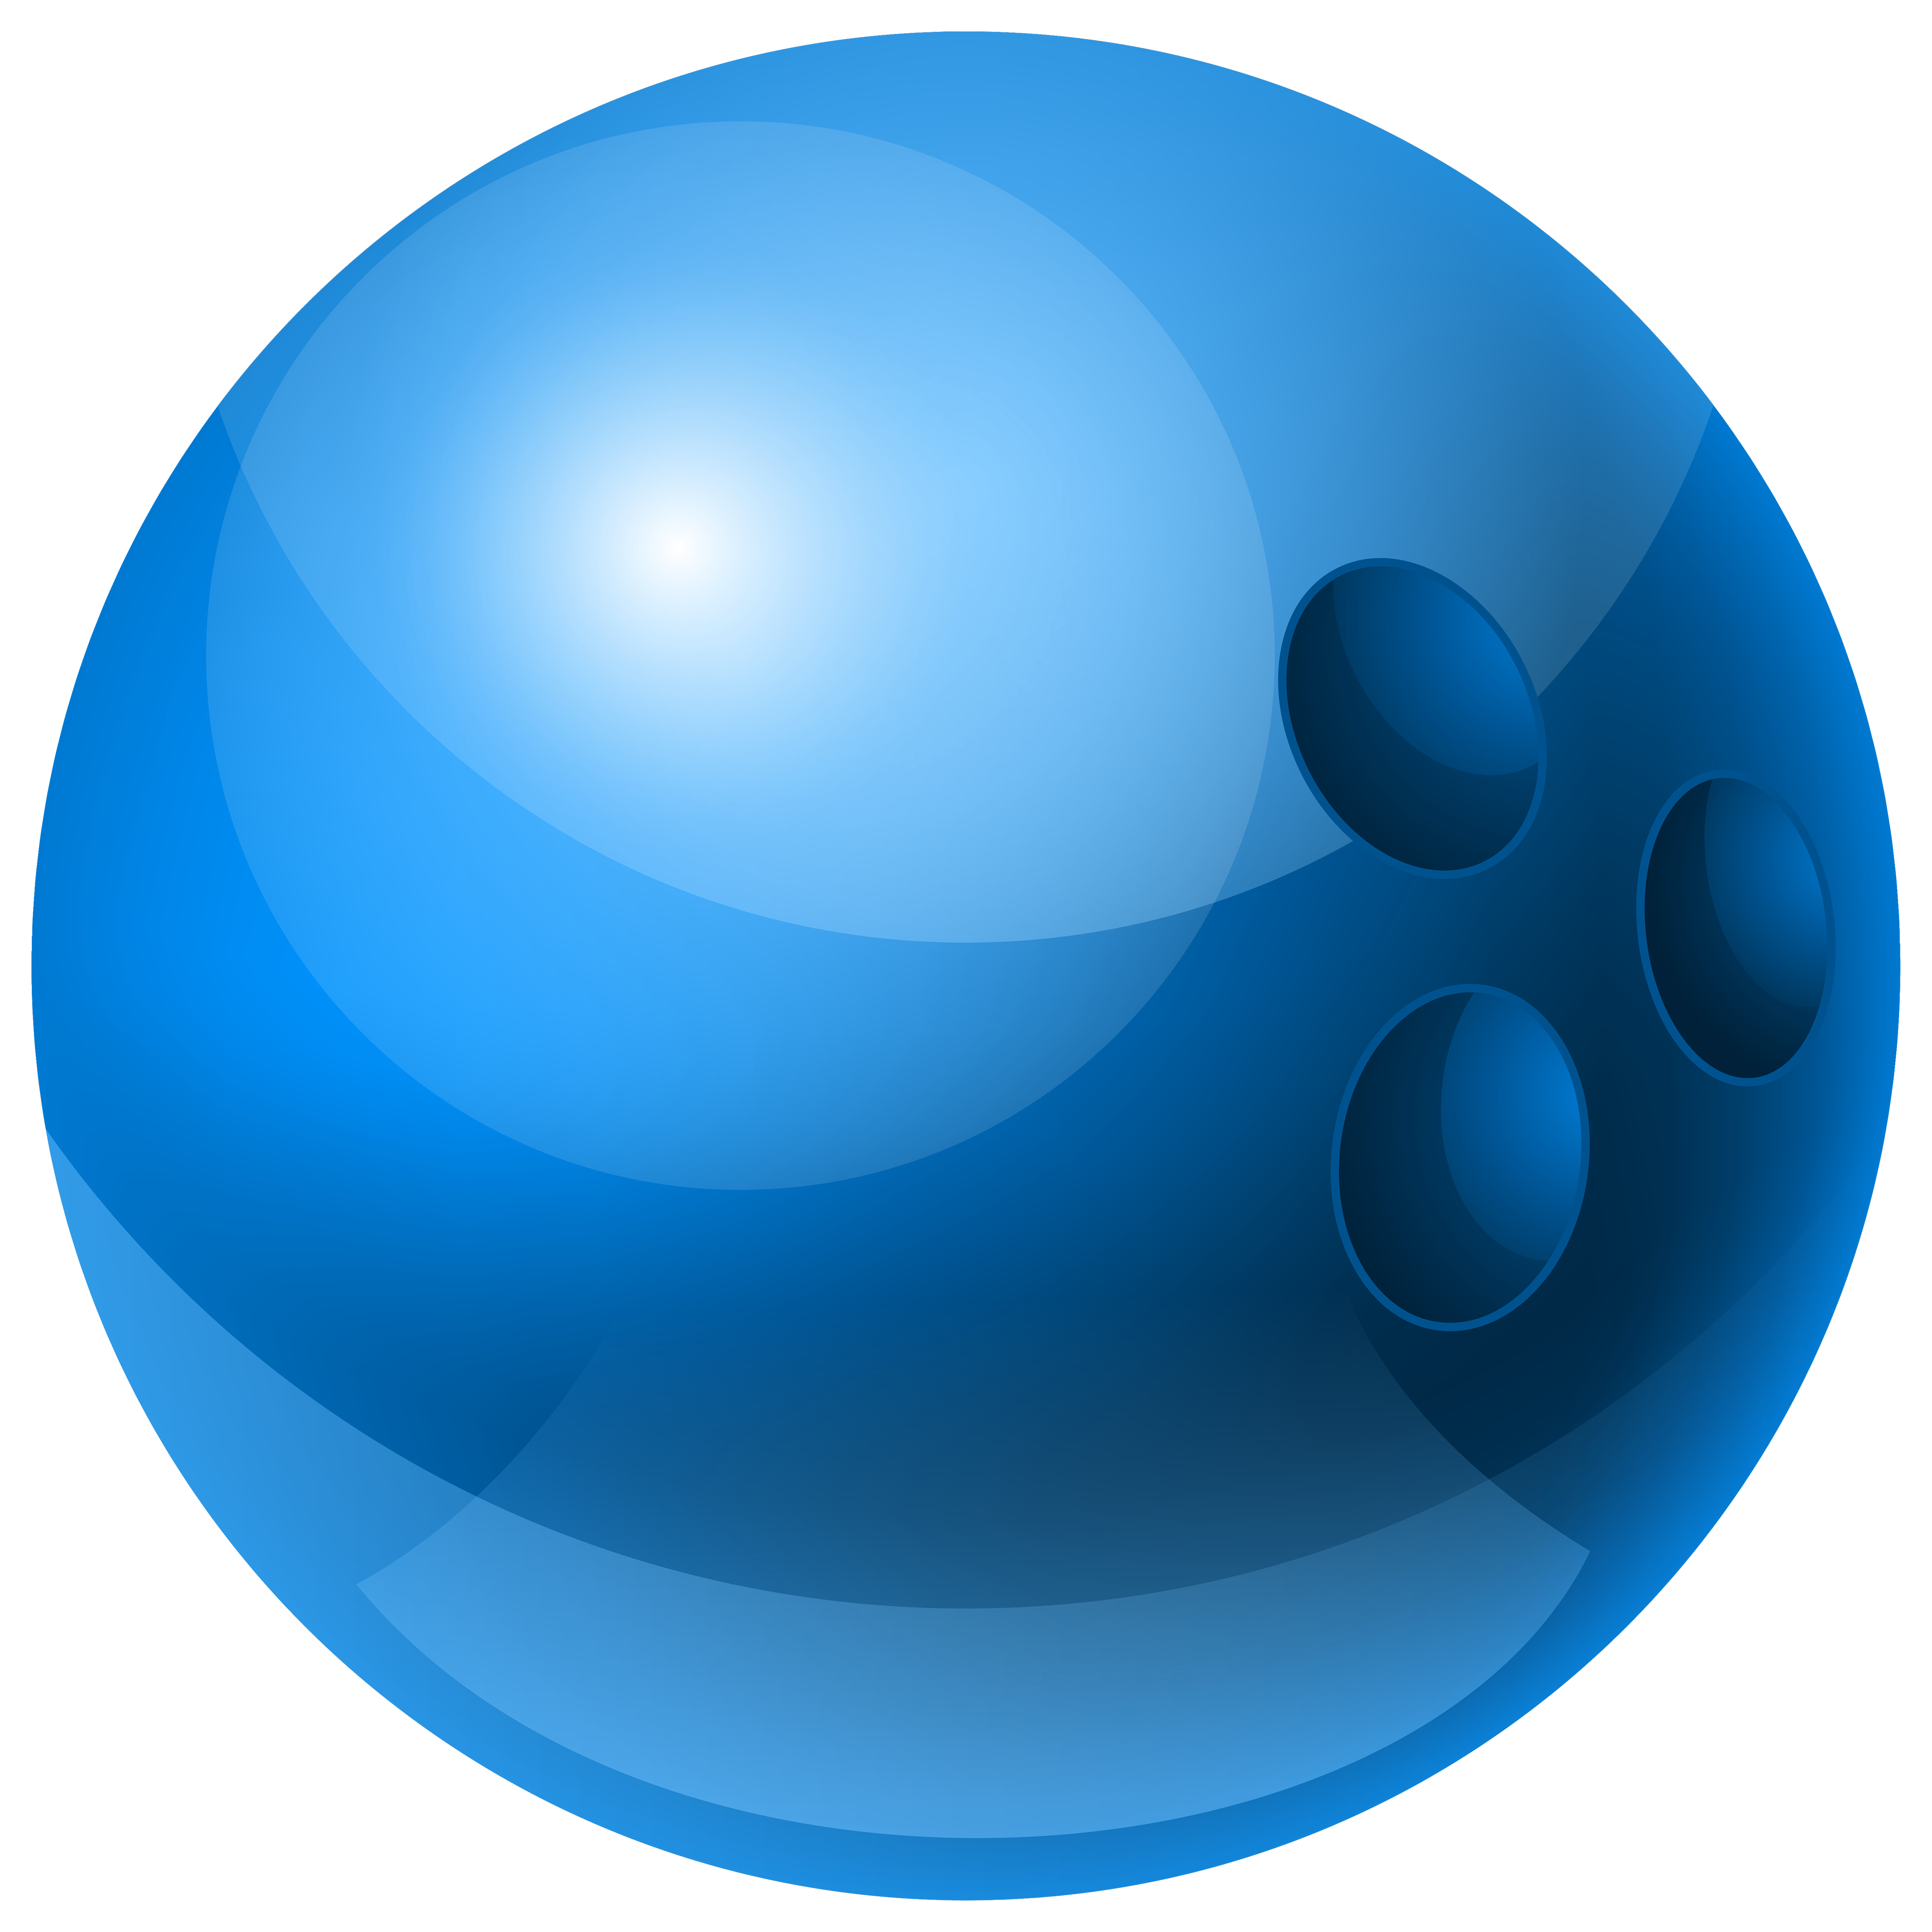 Download Bowling Ball PNG Image for Free | Bowling ball, Bowling, Ball ...